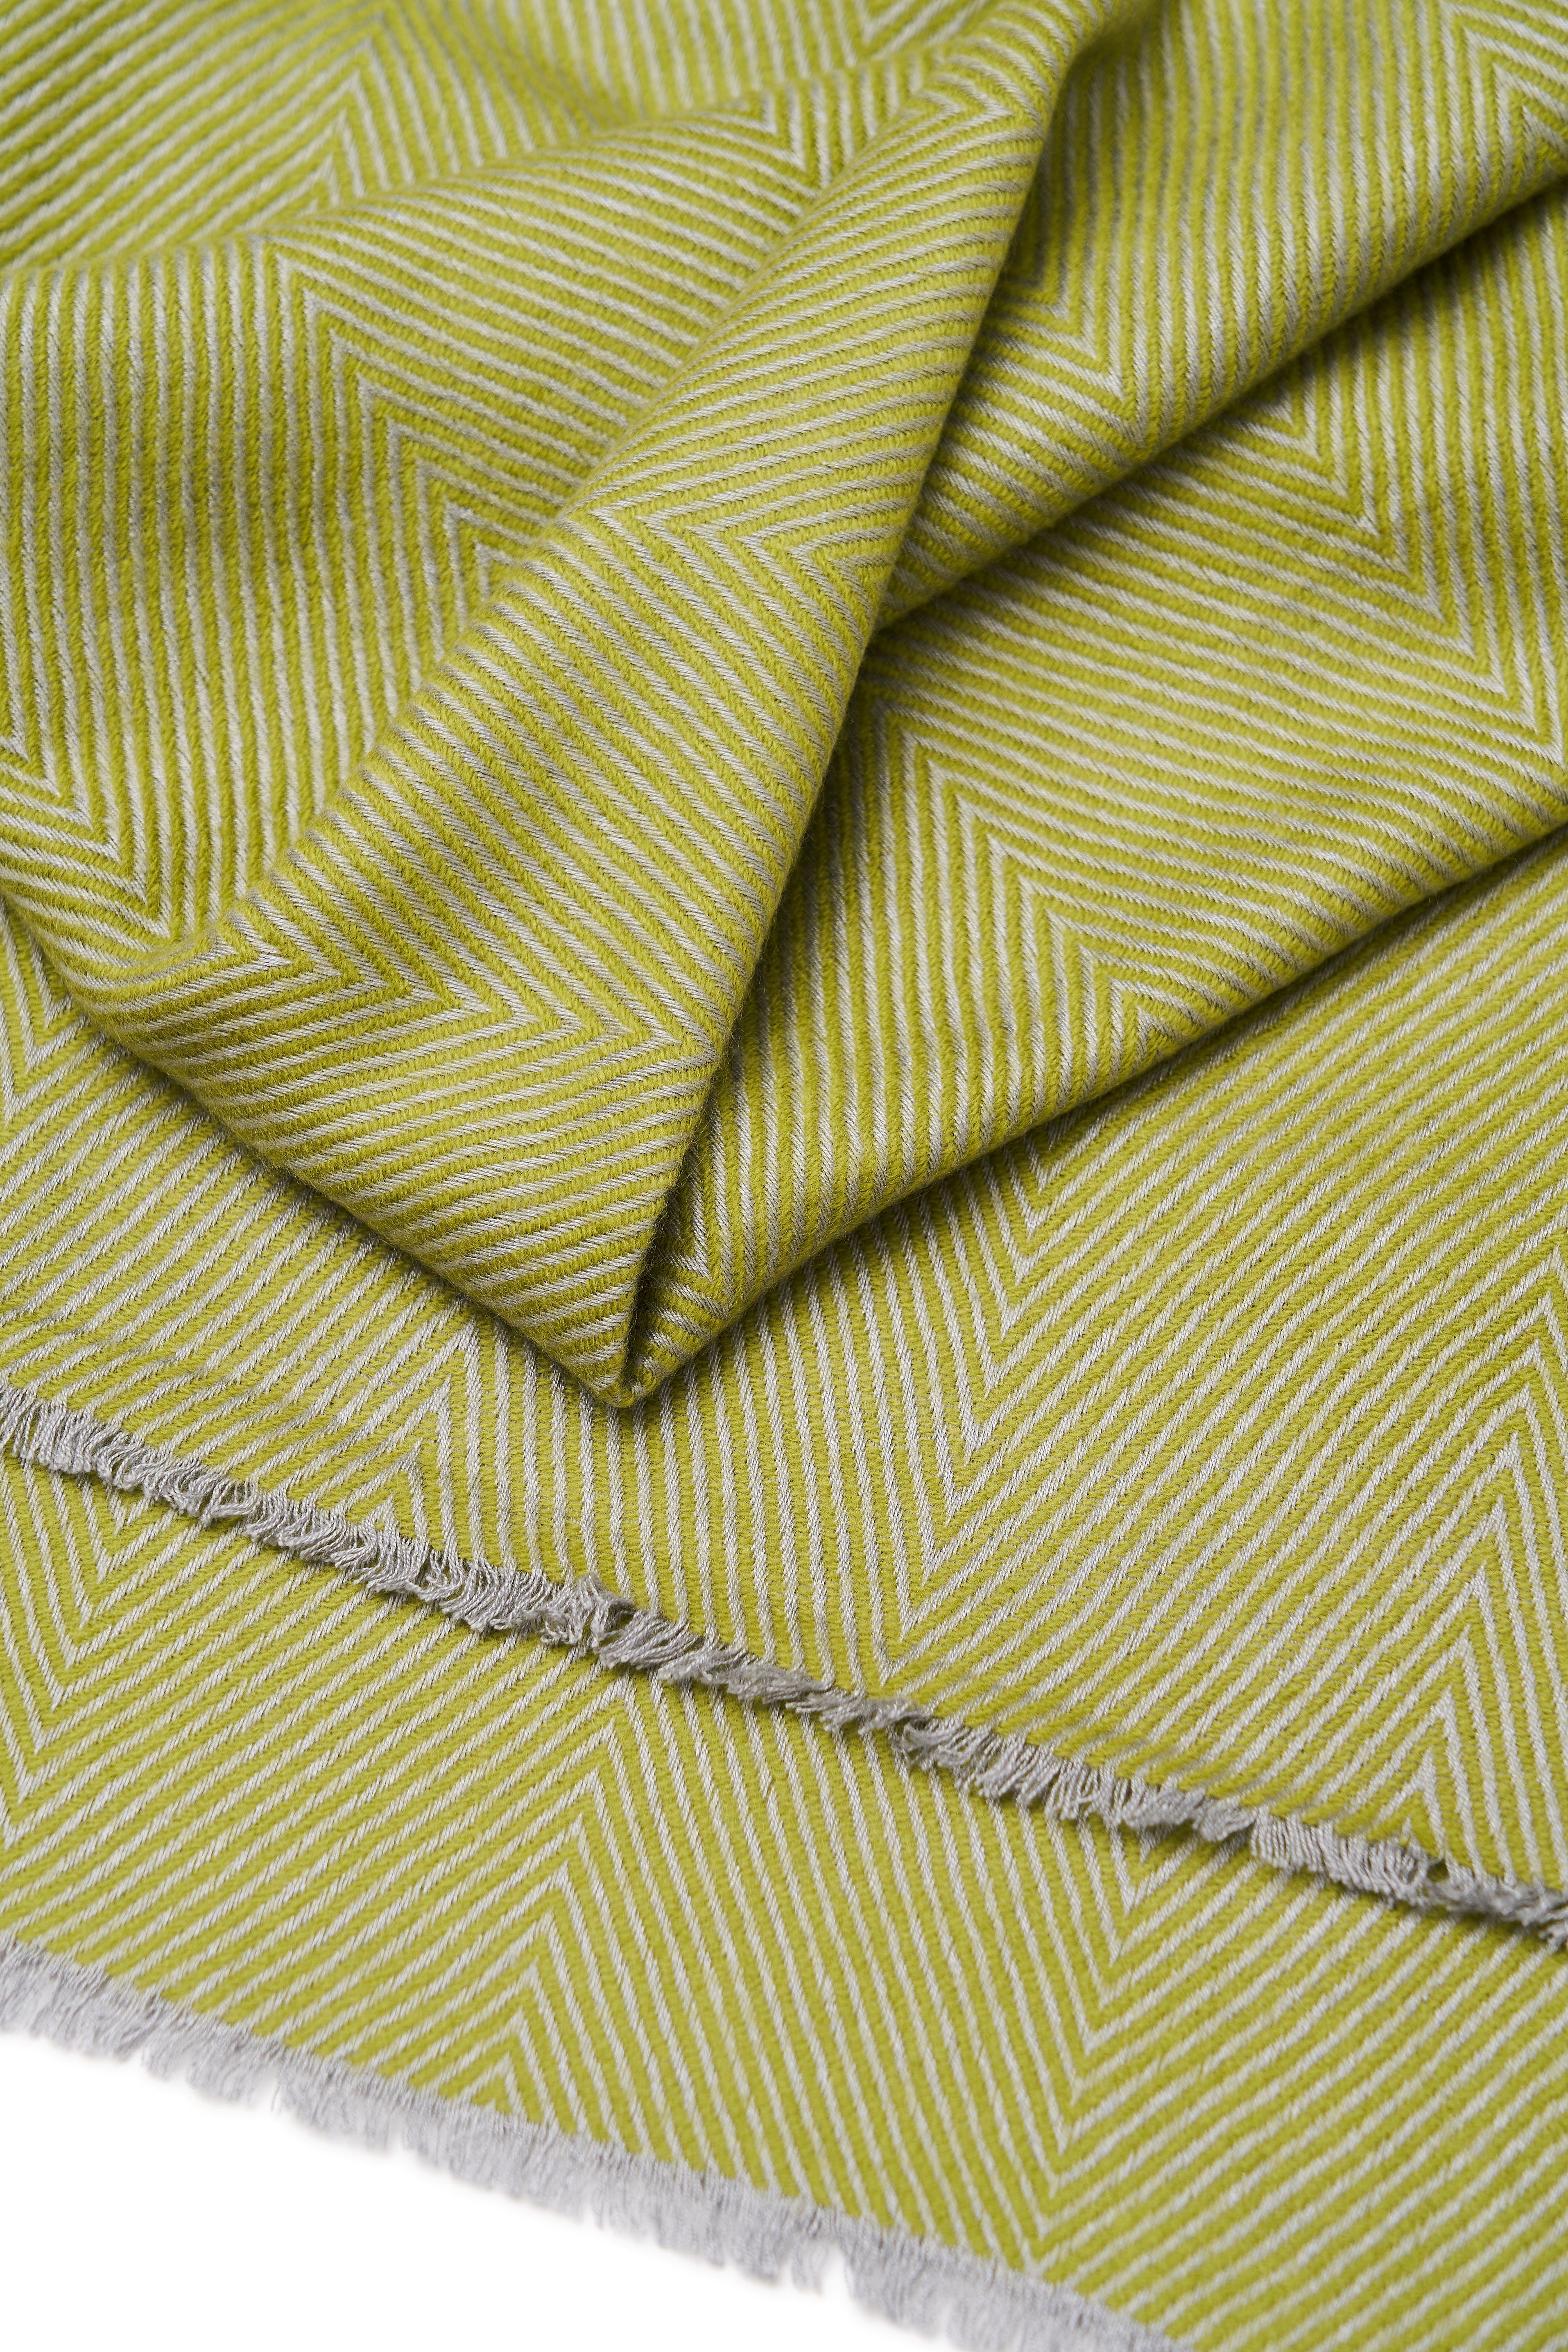 TEXTURED FABRIC OLIVE SCARF